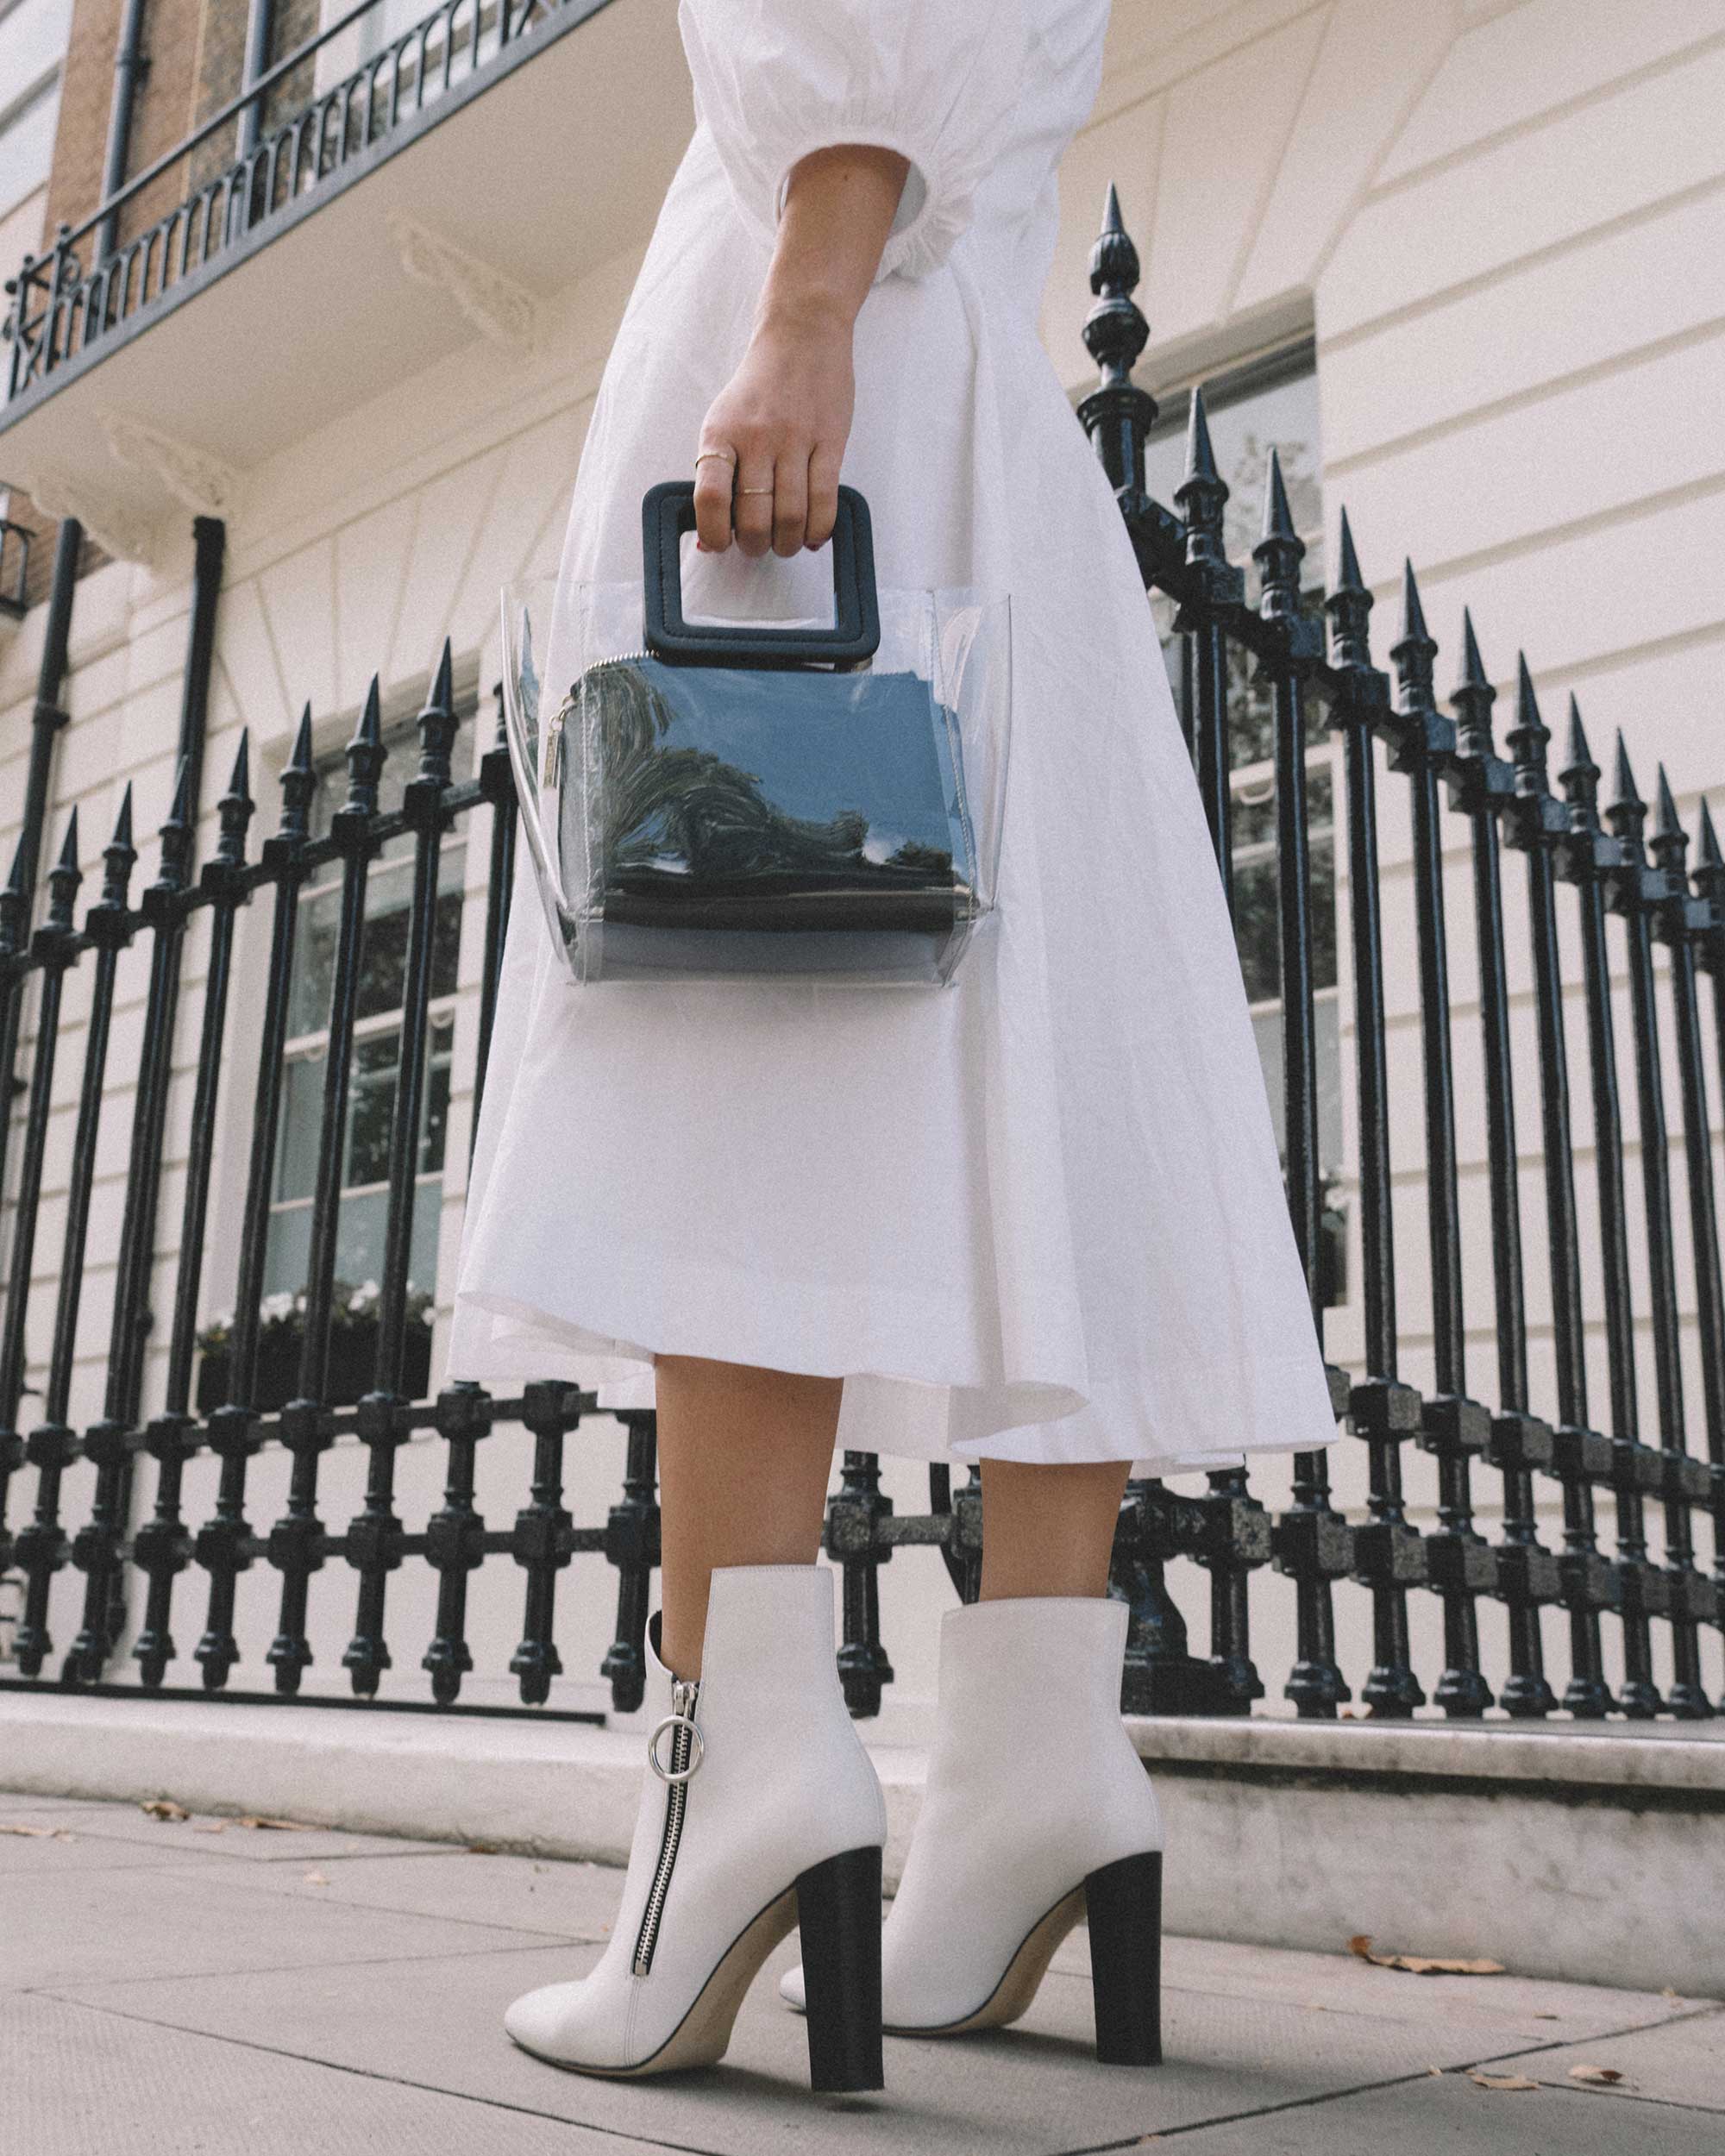 STAUD Eden Midi Dress, STAUD clear and black shirley mini PVC and leather tote, London Fashion Week Outfit6.jpg